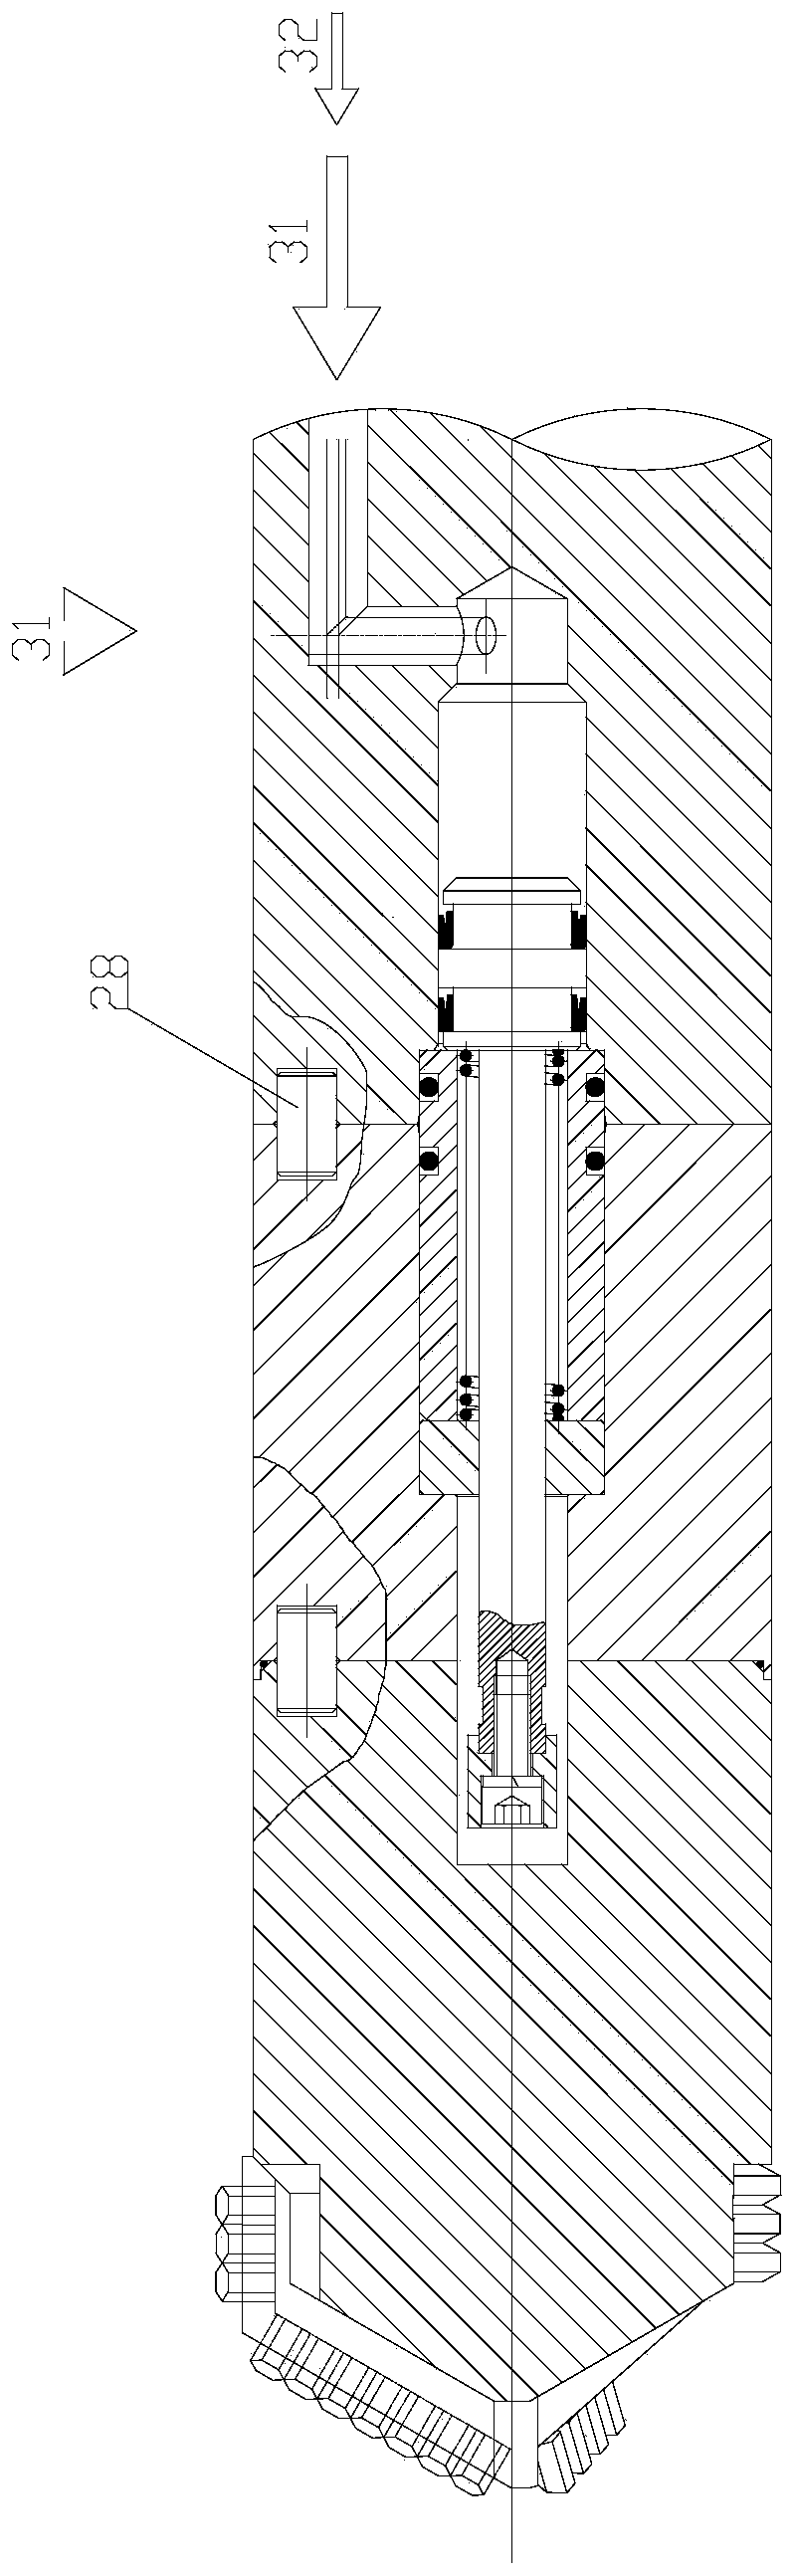 Double grouting nozzle device with self opening and closing function